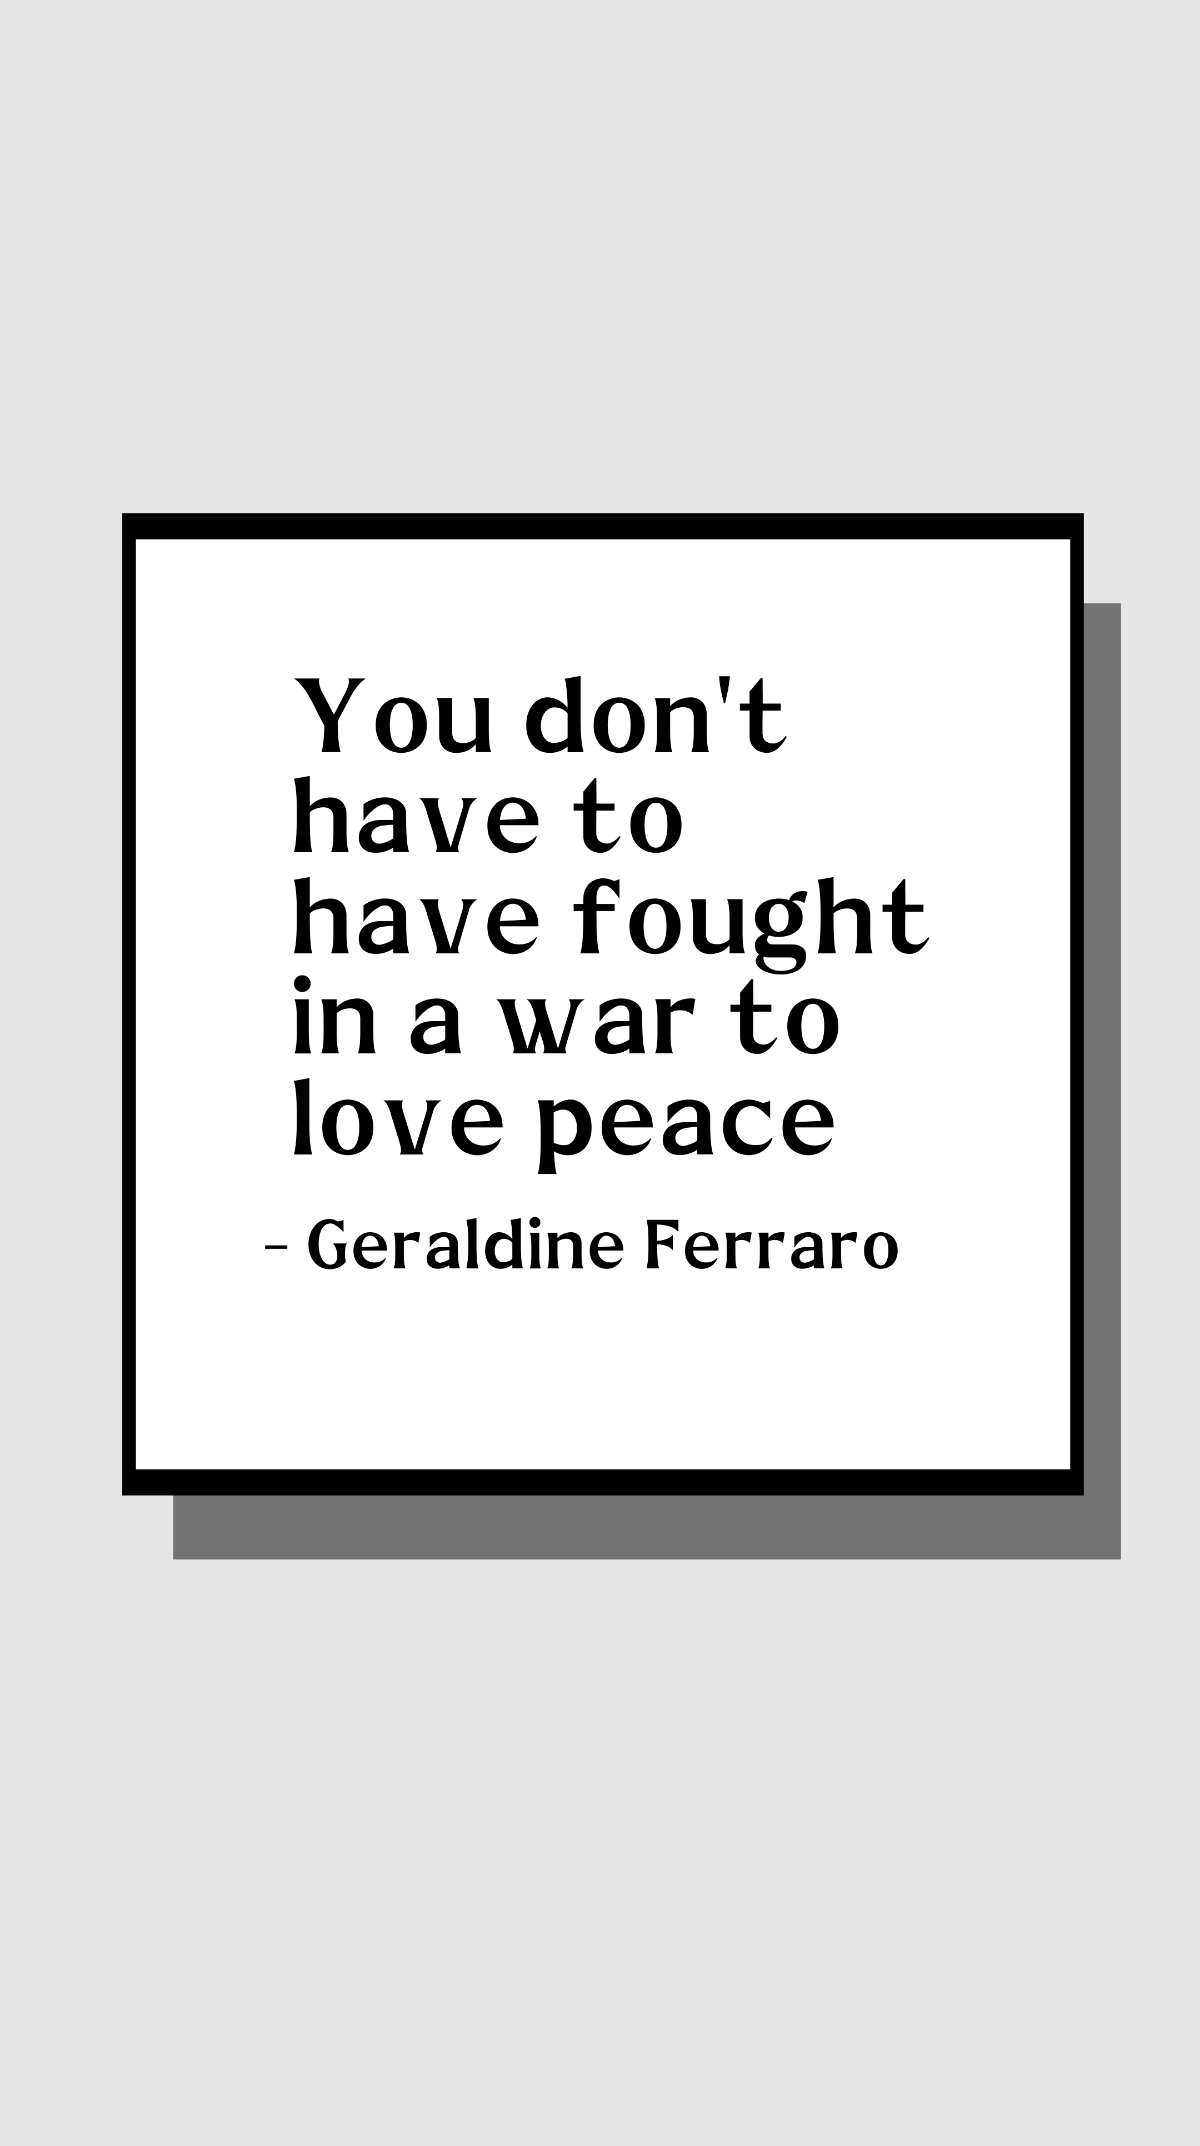 Free Geraldine Ferraro - You don't have to have fought in a war to love peace Template